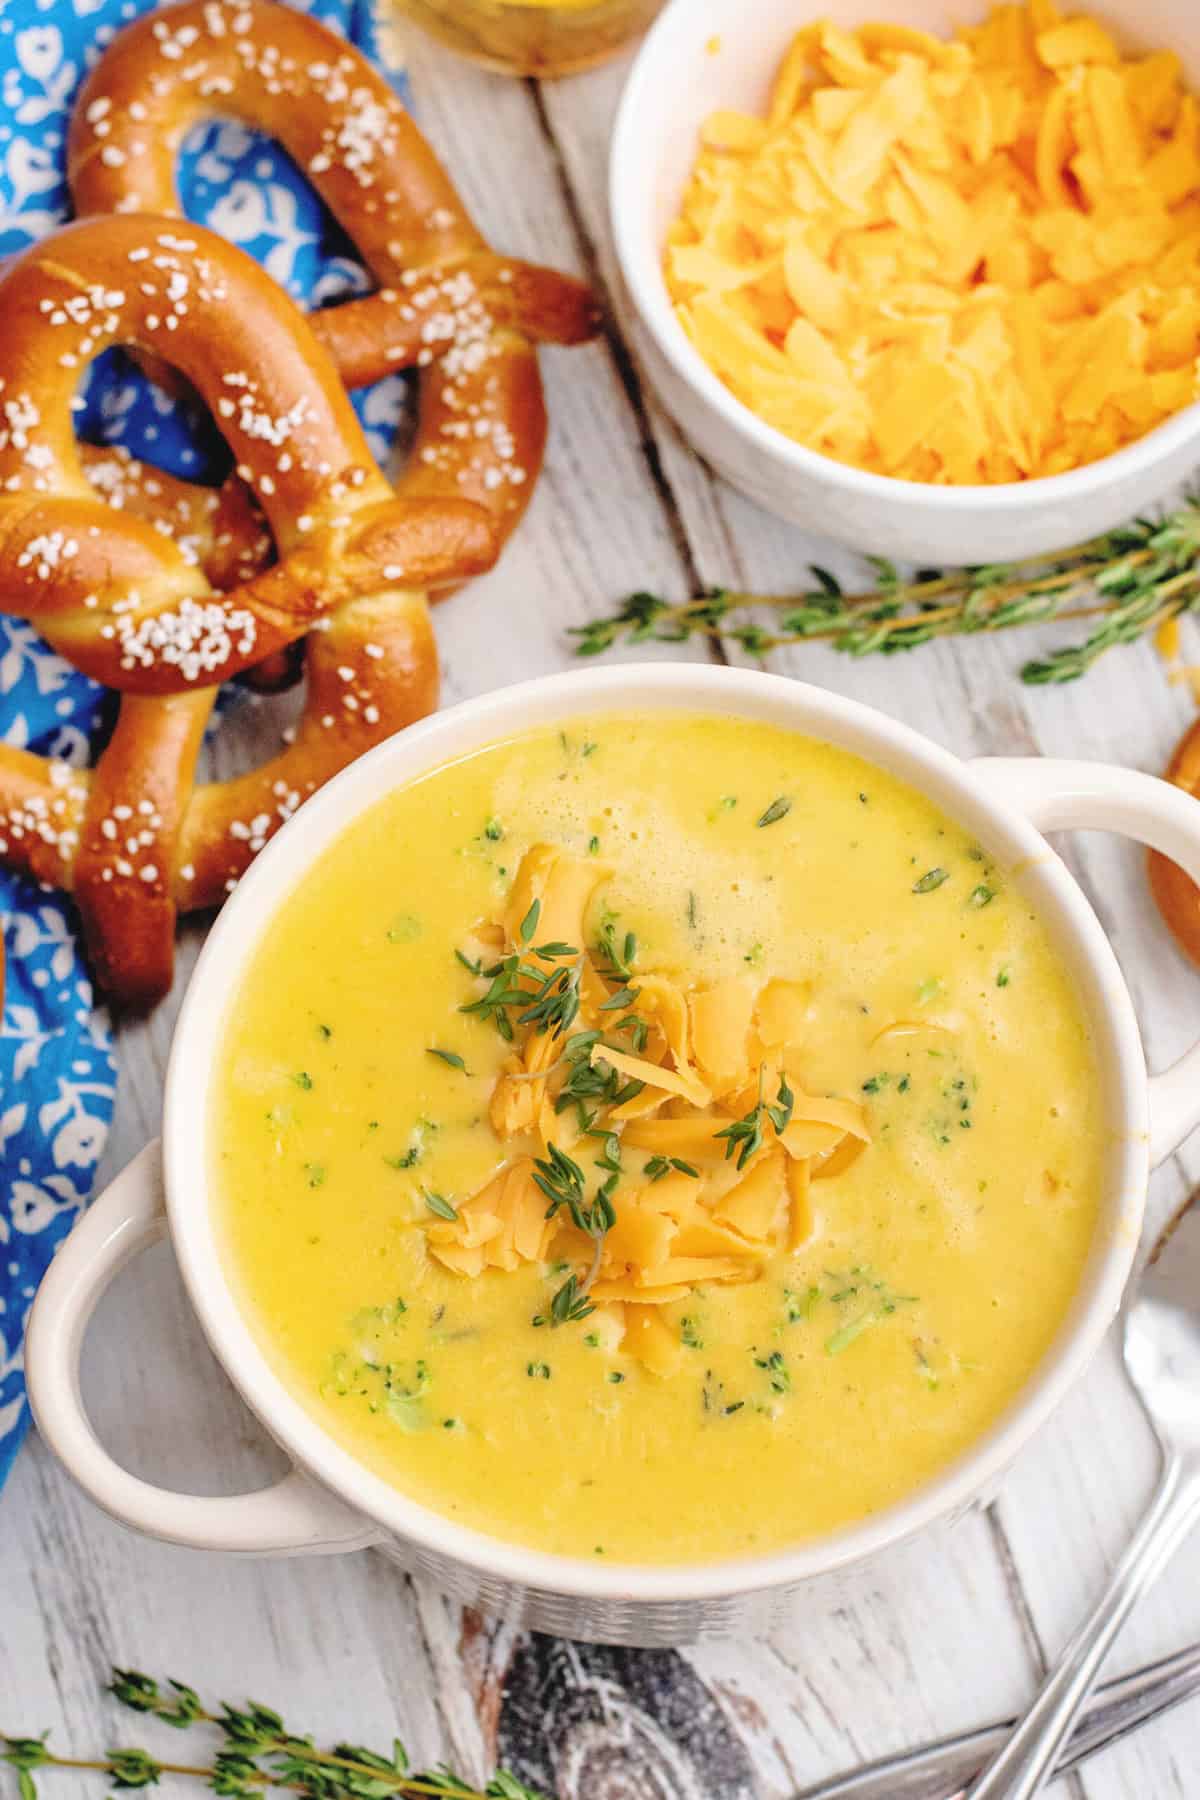 Bowl of broccoli beer cheese soup.